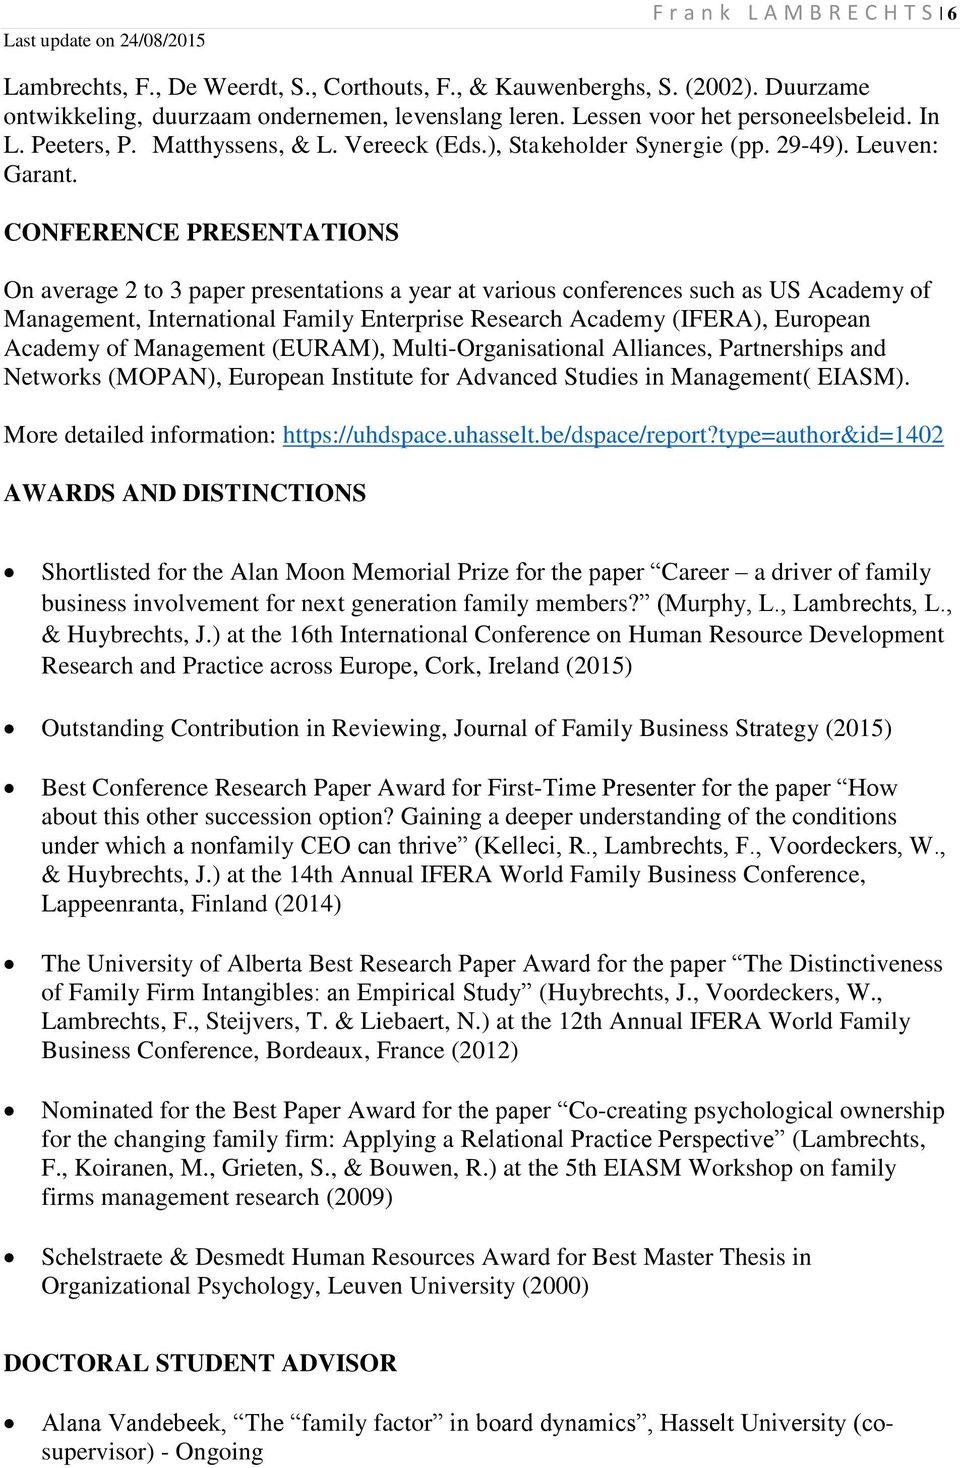 CONFERENCE PRESENTATIONS On average 2 to 3 paper presentations a year at various conferences such as US Academy of Management, International Family Enterprise Research Academy (IFERA), European